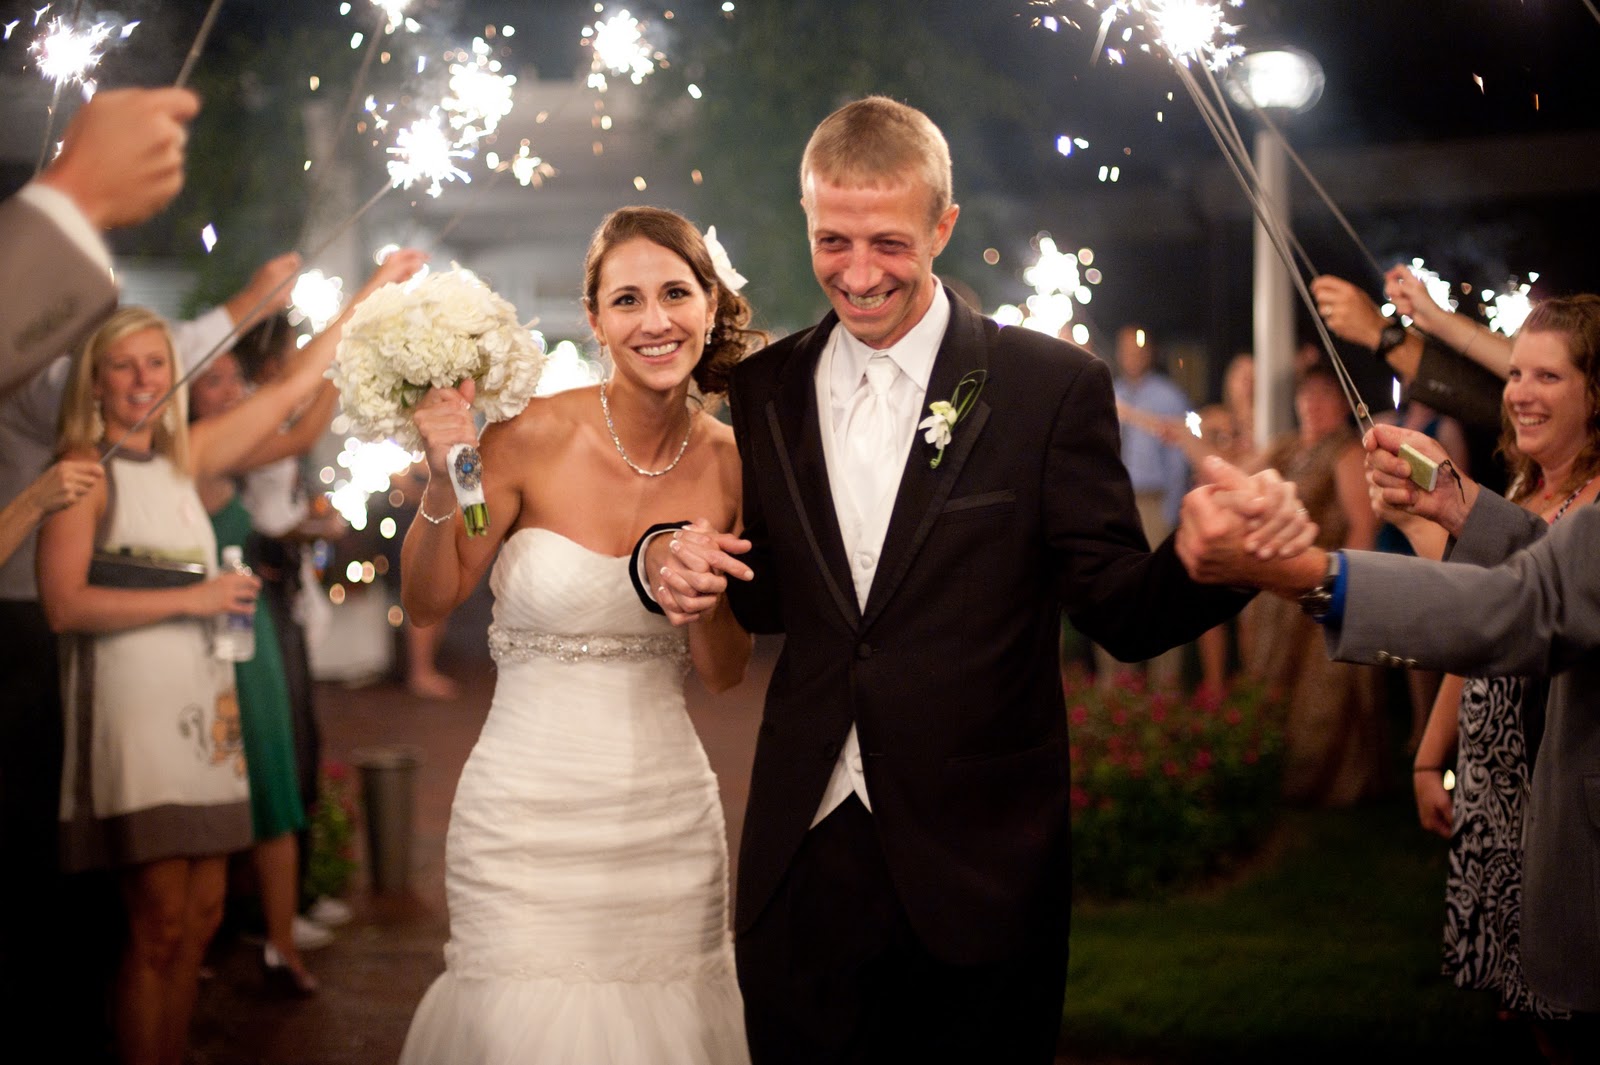 church wedding decorations.jpg wedding sparklers during the day